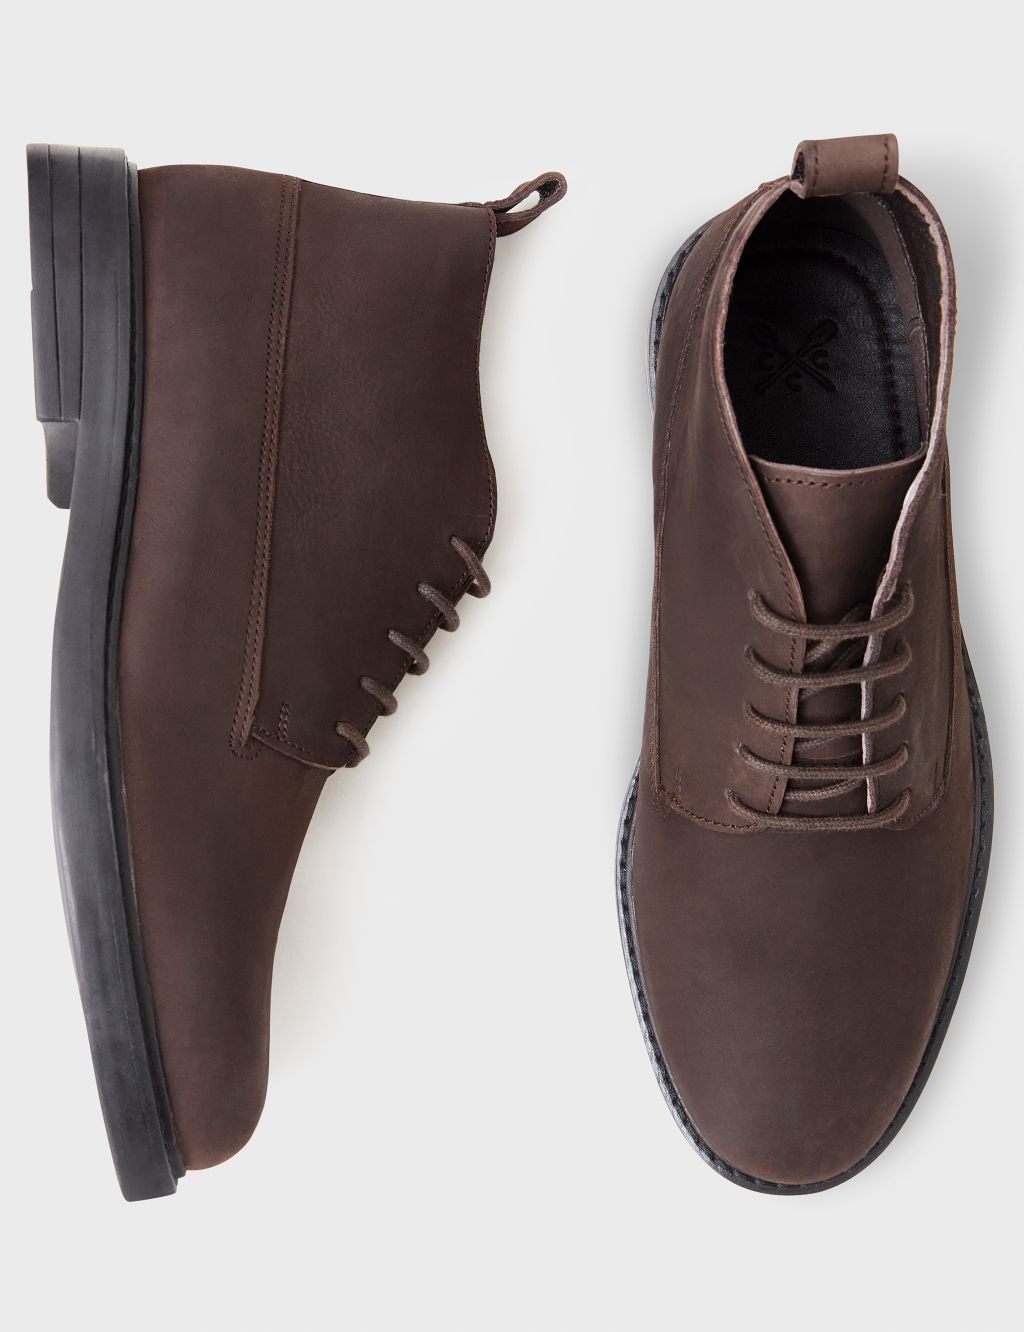 Leather Desert Boots image 4